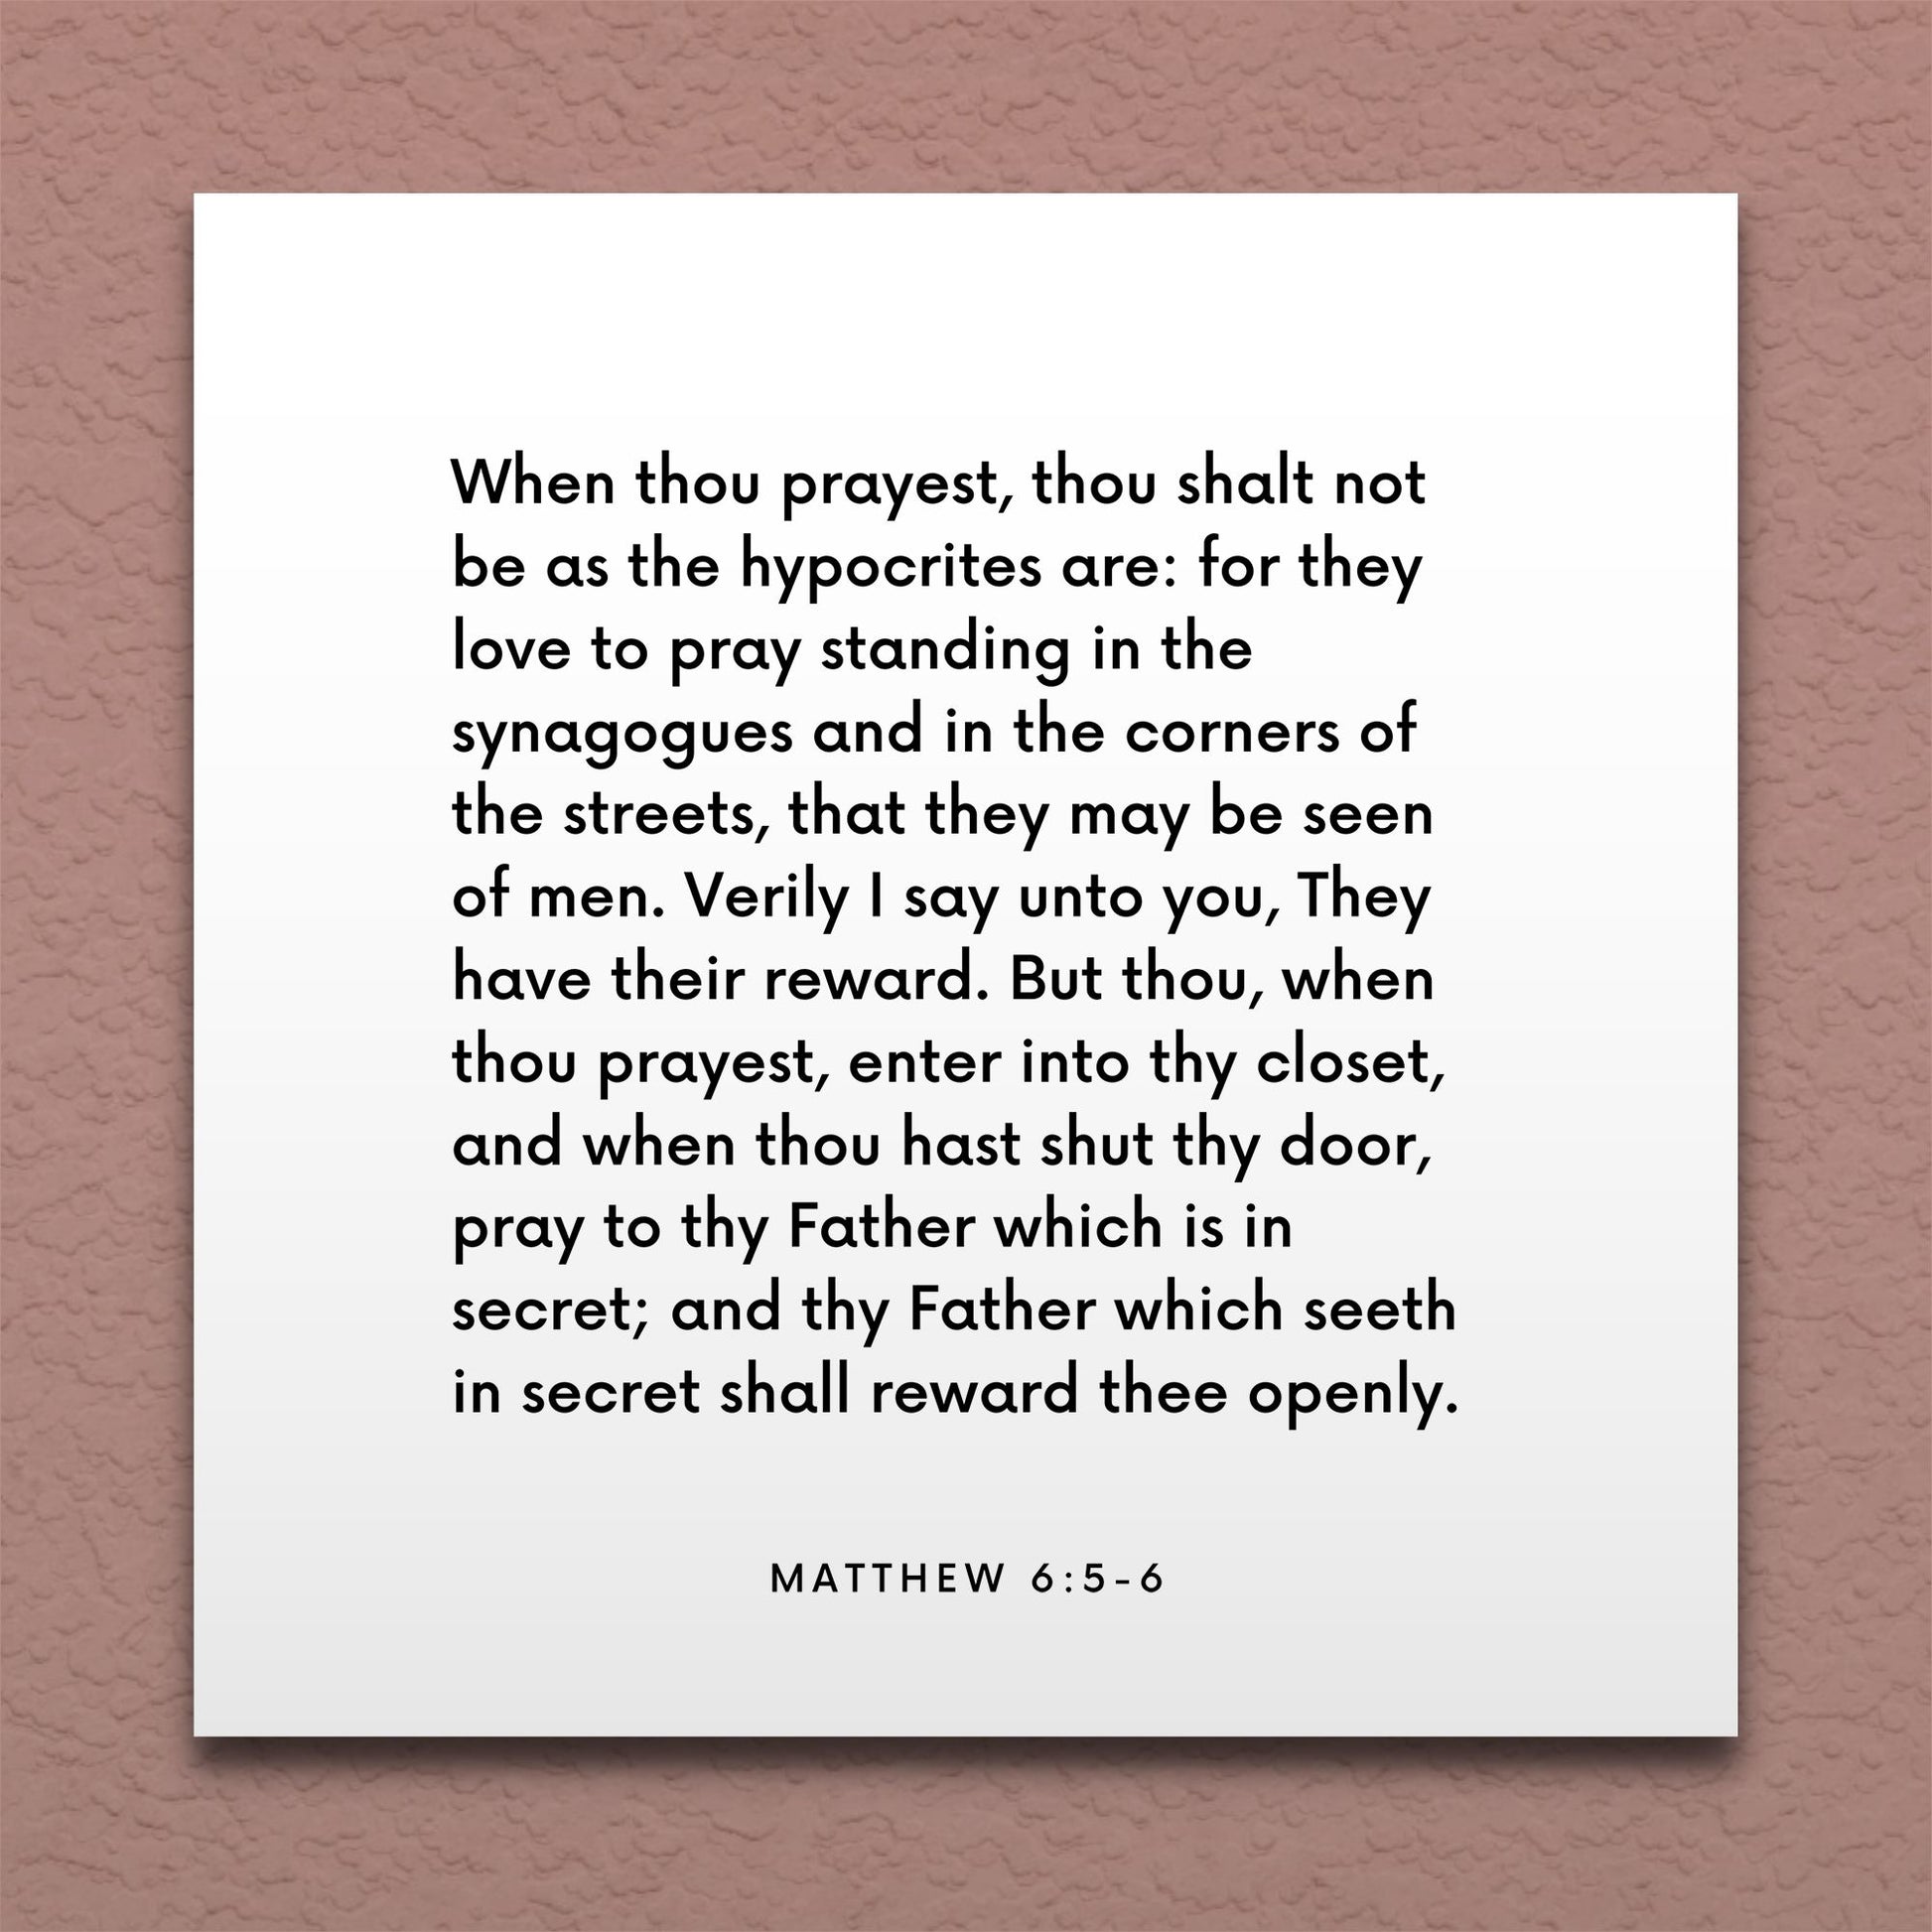 Wall-mounted scripture tile for Matthew 6:5-6 - "When thou prayest, thou shalt not be as the hypocrites"